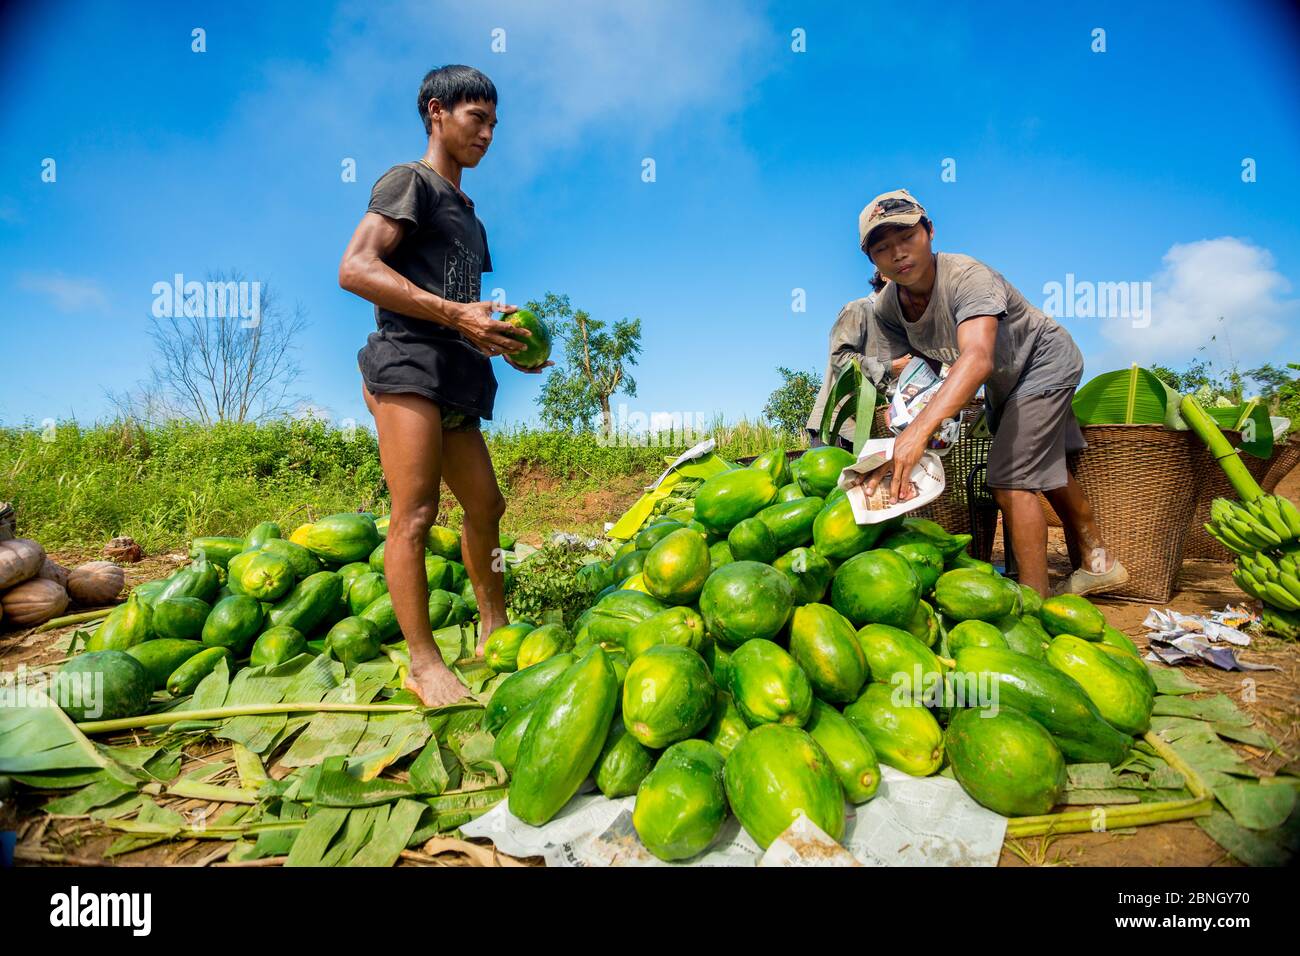 Bangladesh – October 12, 2019: The hill tribal laborers are storing fresh vegetables from the fields and packaging them to send to the market at Banda Stock Photo